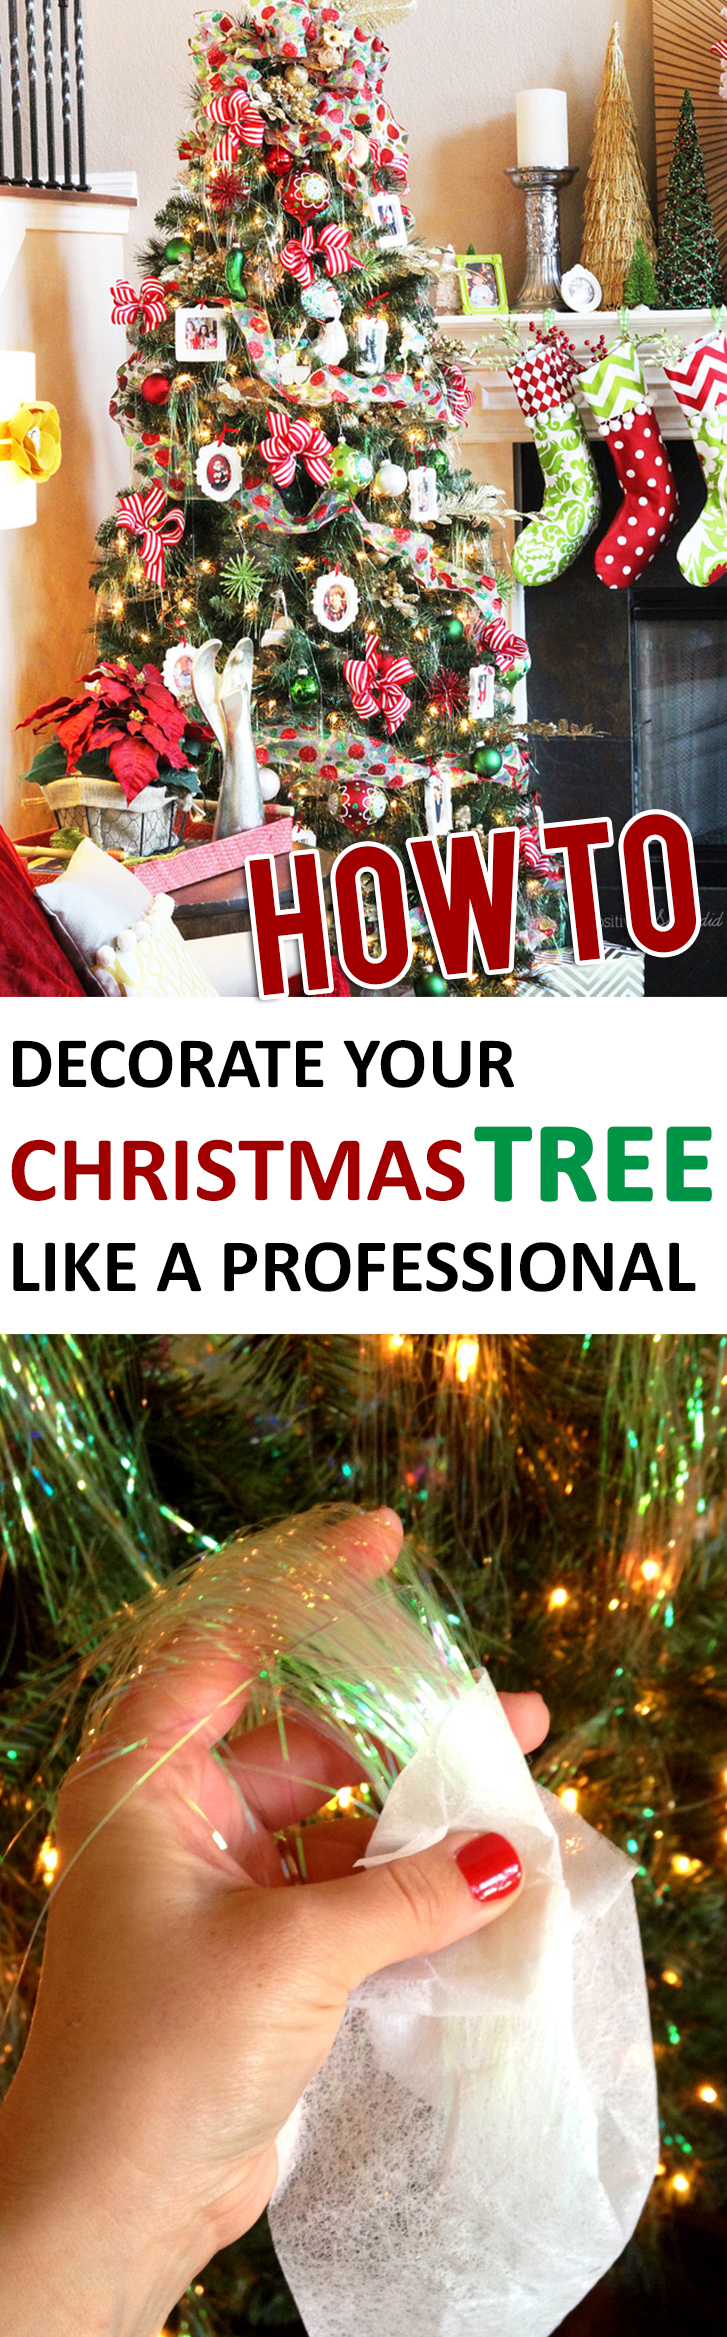 How To Decorate Your Christmas Tree Like A Professional